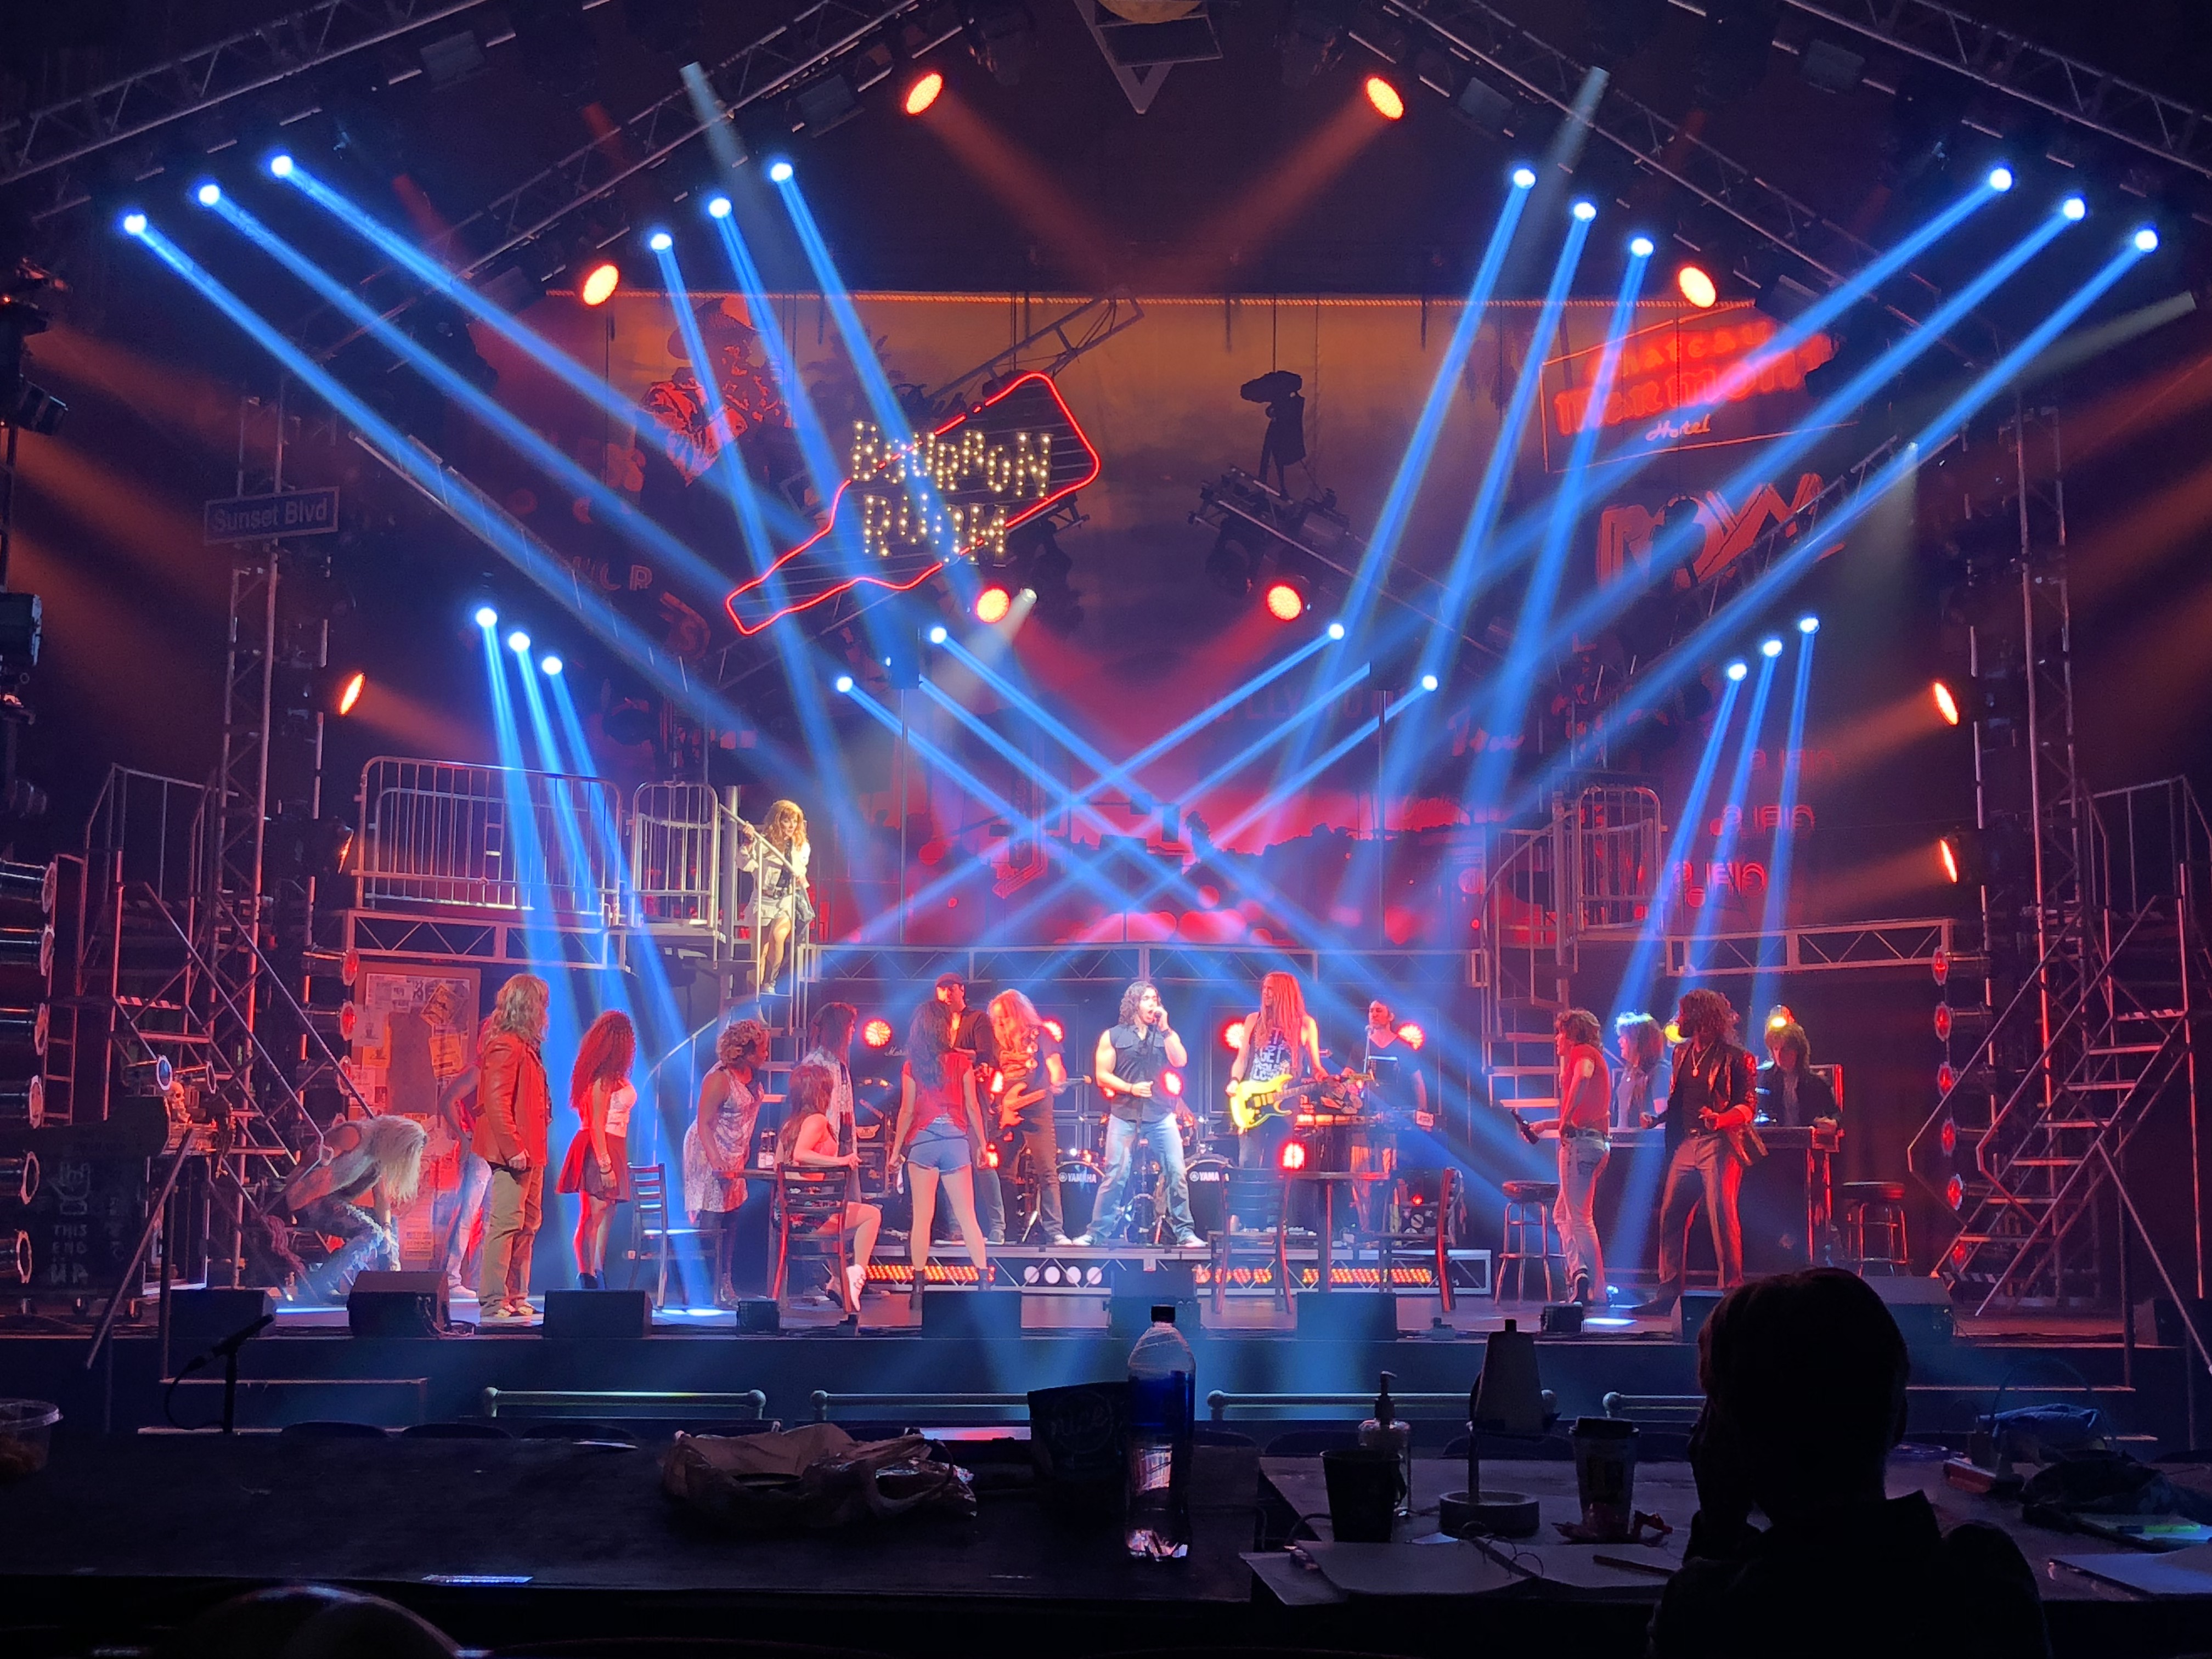 Photo 10 in 'Rock of Ages 10th Anniversary Tour' gallery showcasing lighting design by Mike Baldassari of Mike-O-Matic Industries LLC